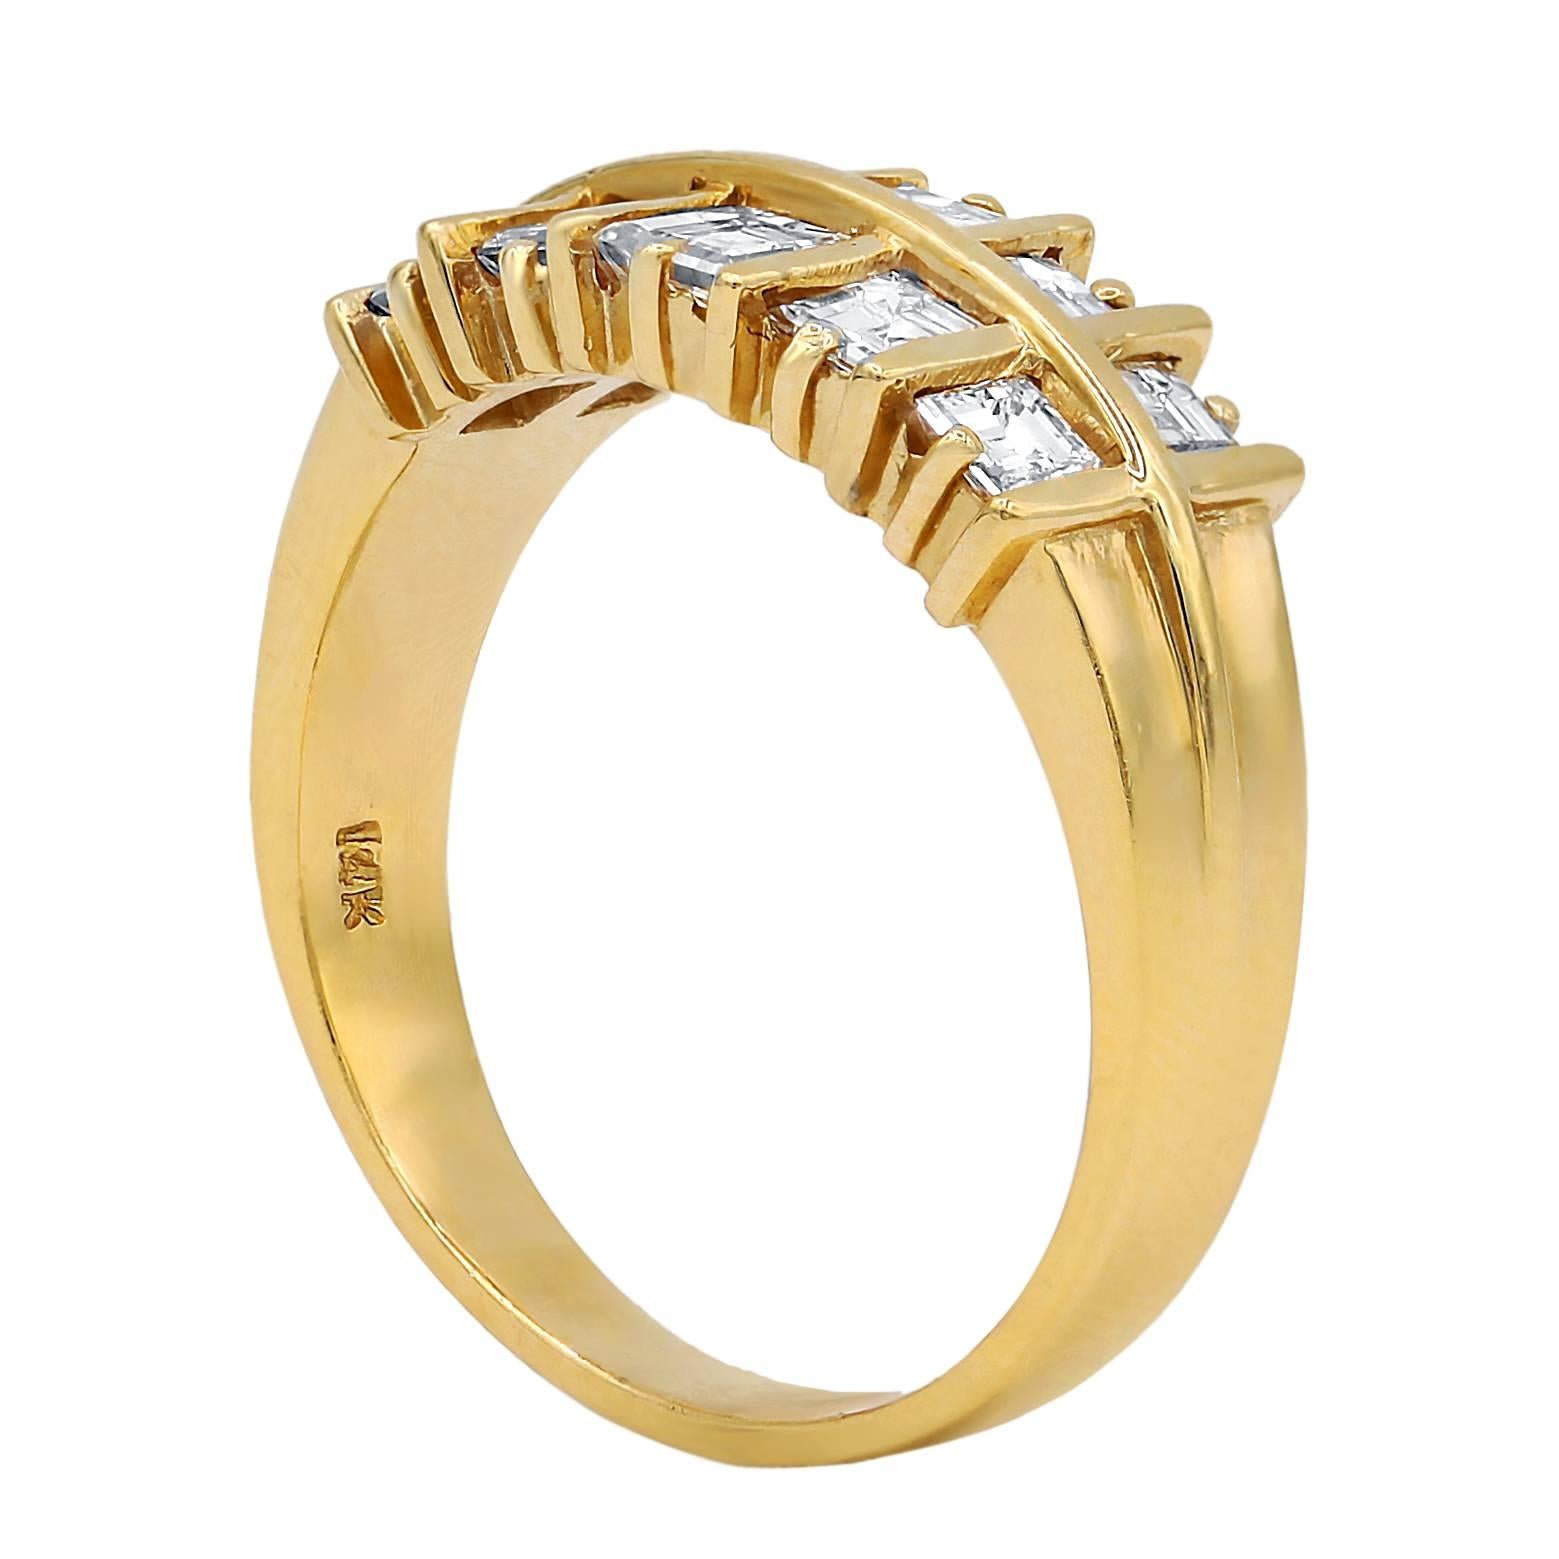 Two row wedding band consisting of 10 assher cut diamonds 1.20 carats FG color/VS clarity set in 14 karat yellow gold.